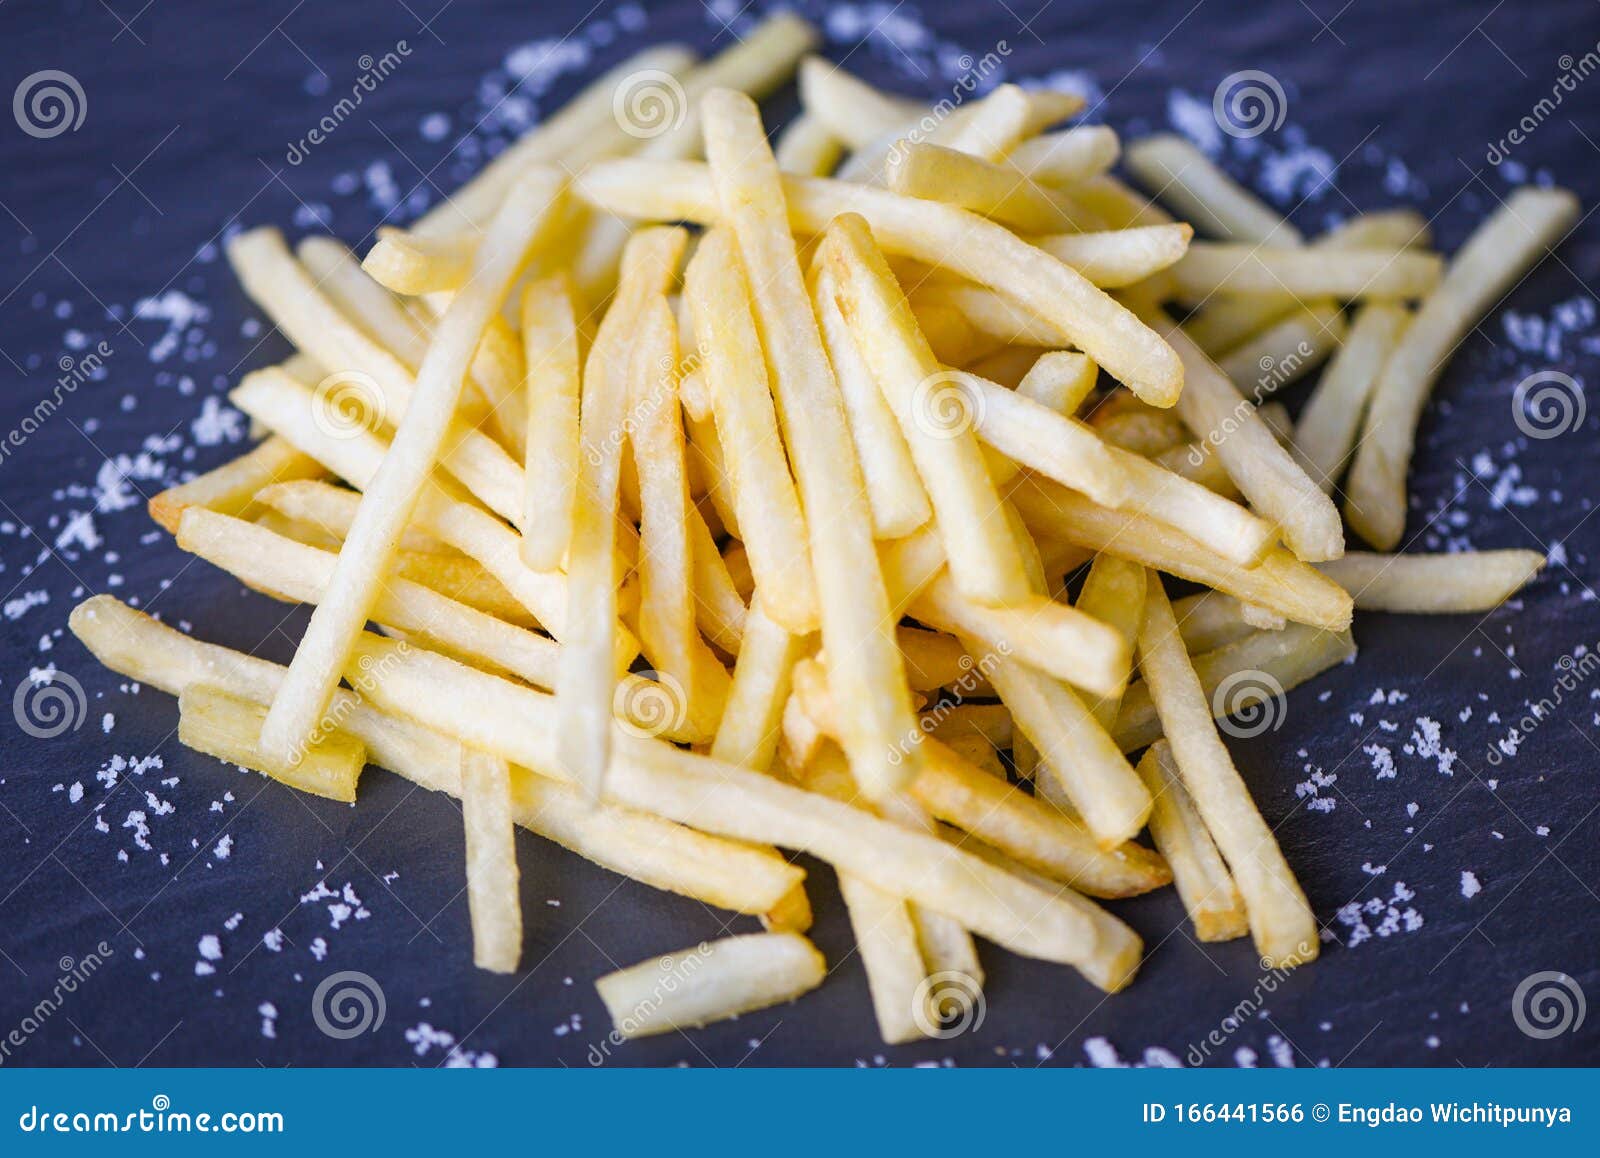 Fresh French Fries With Salt On Black Plate Tasty Potato Fries For Food Or Snack Delicious Italian Meny Homemade Ingredients Stock Photo Image Of Plate Meat 166441566